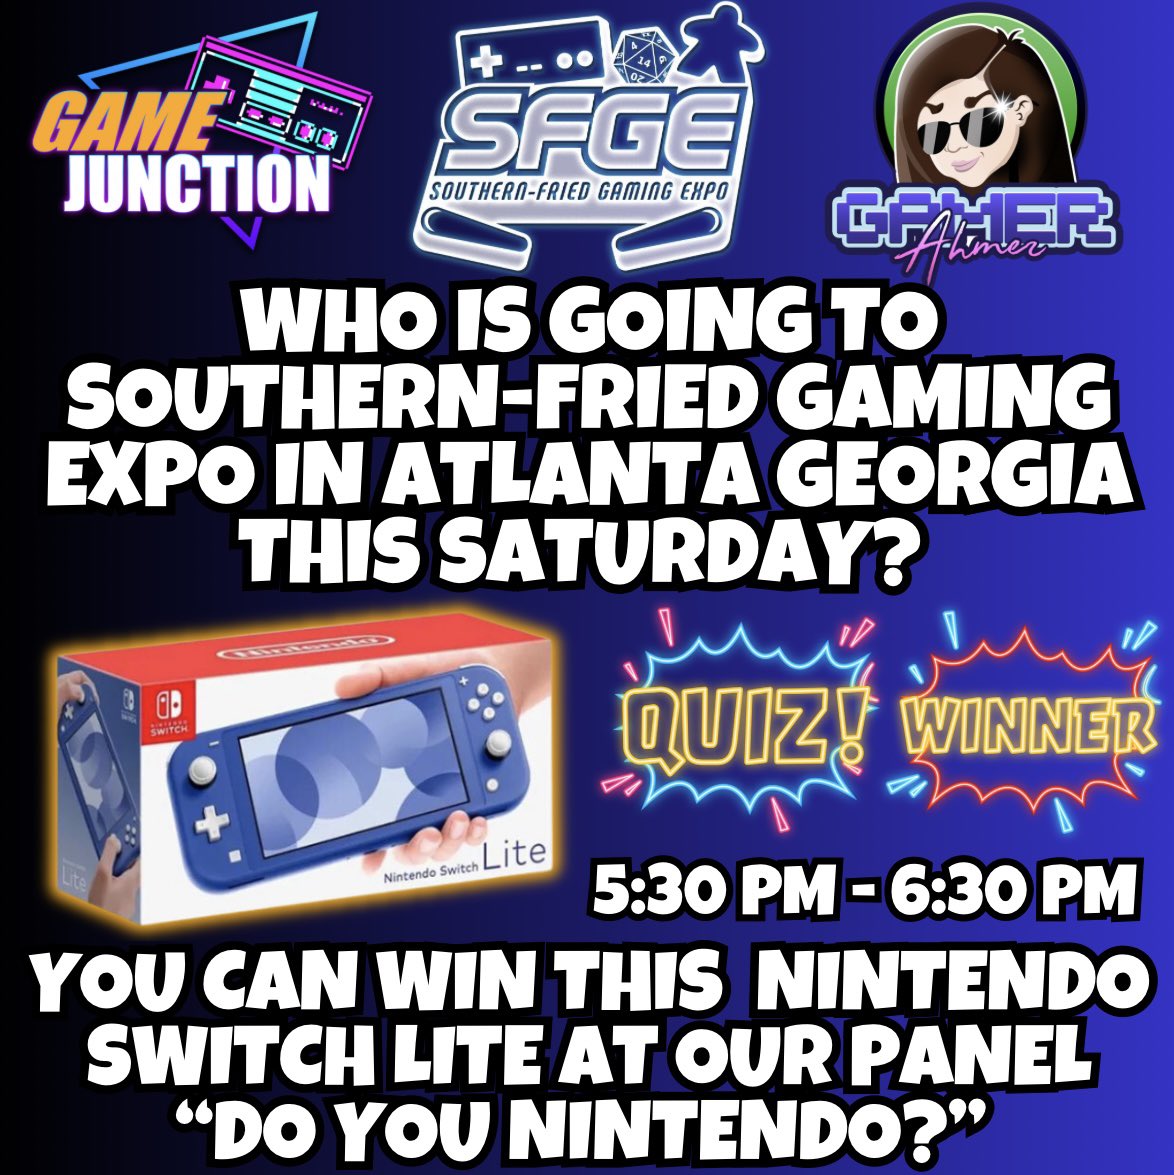 Can’t wait for the weekend! Come stop by and say hi on Saturday at the panel with us! We are going to have a blast and have some giveaways! #videogames #southernfriedgamingexpo #sfge #sfge2023 #gamerahmer #gamejunction #pinball #arcade #nintendo #nintendoswitch @SFGamingExpo